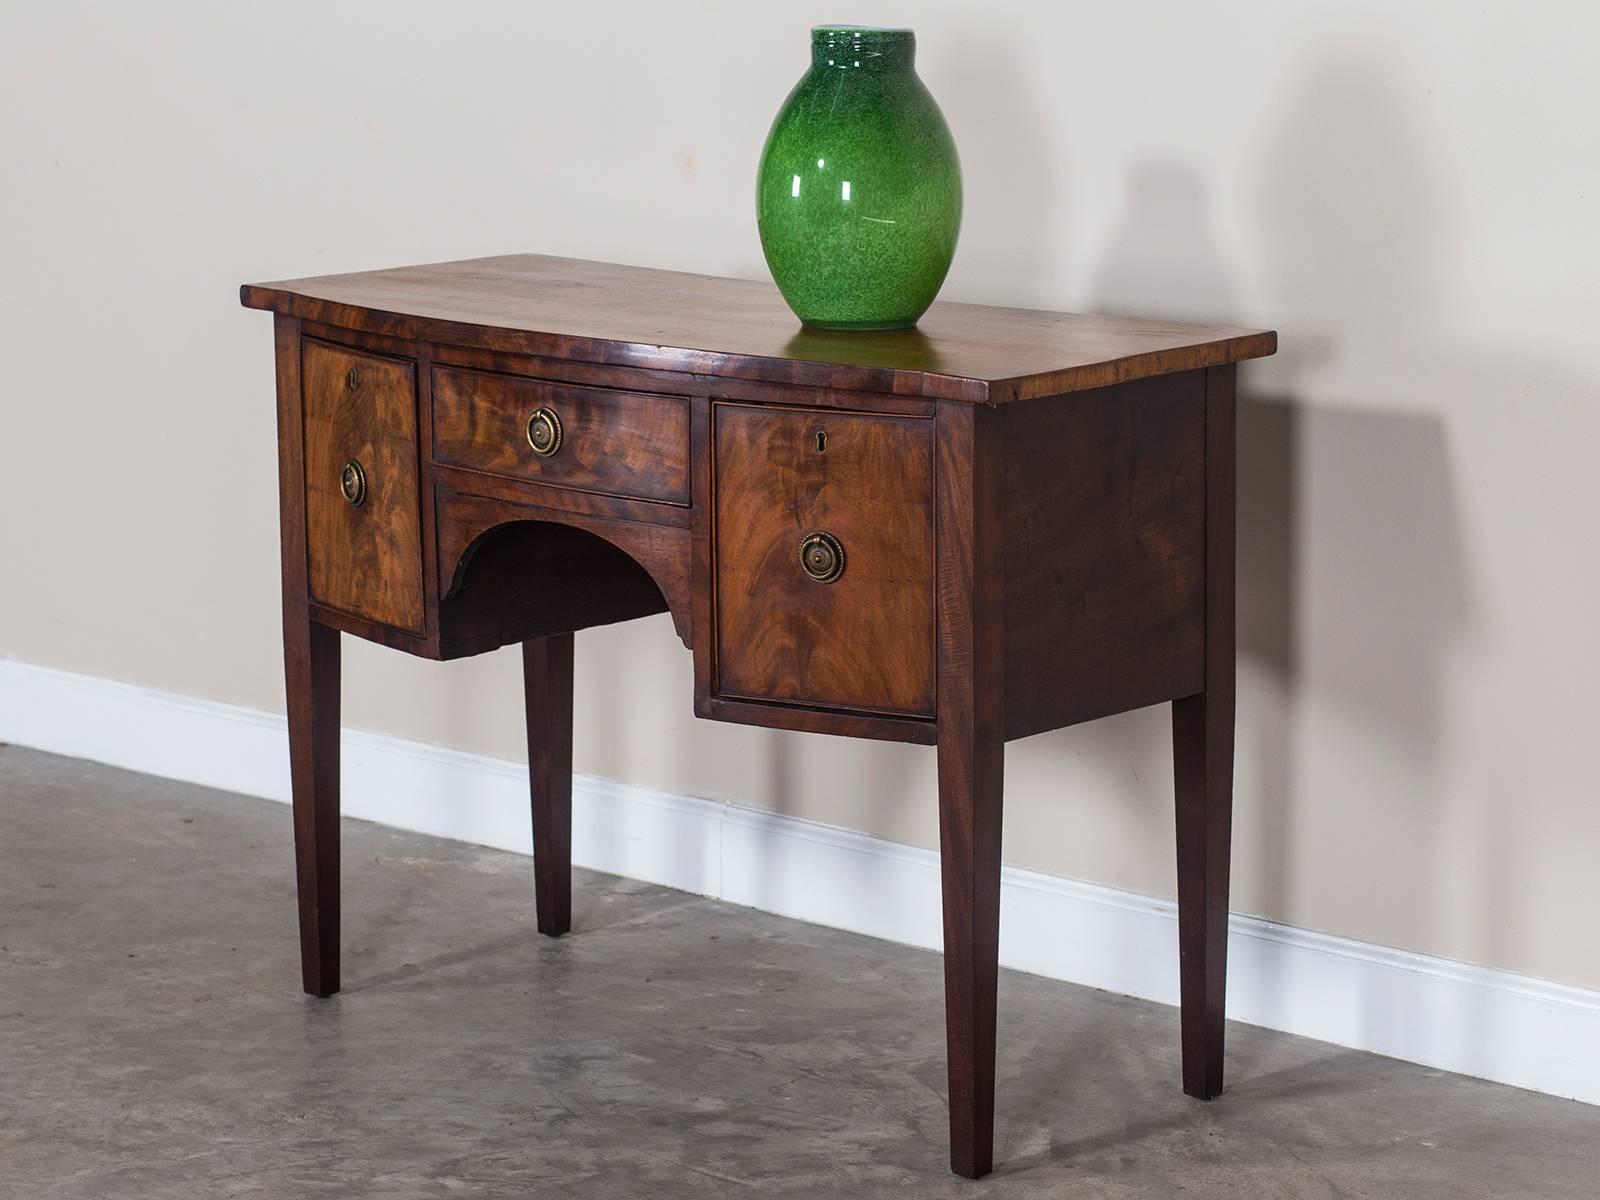 Receive our new selections direct from 1stdibs by email each week. Please click follow Dealer below and see them first!

The simplicity of this antique English George III period bow front table circa 1820 gives it a certain modern quality. Please